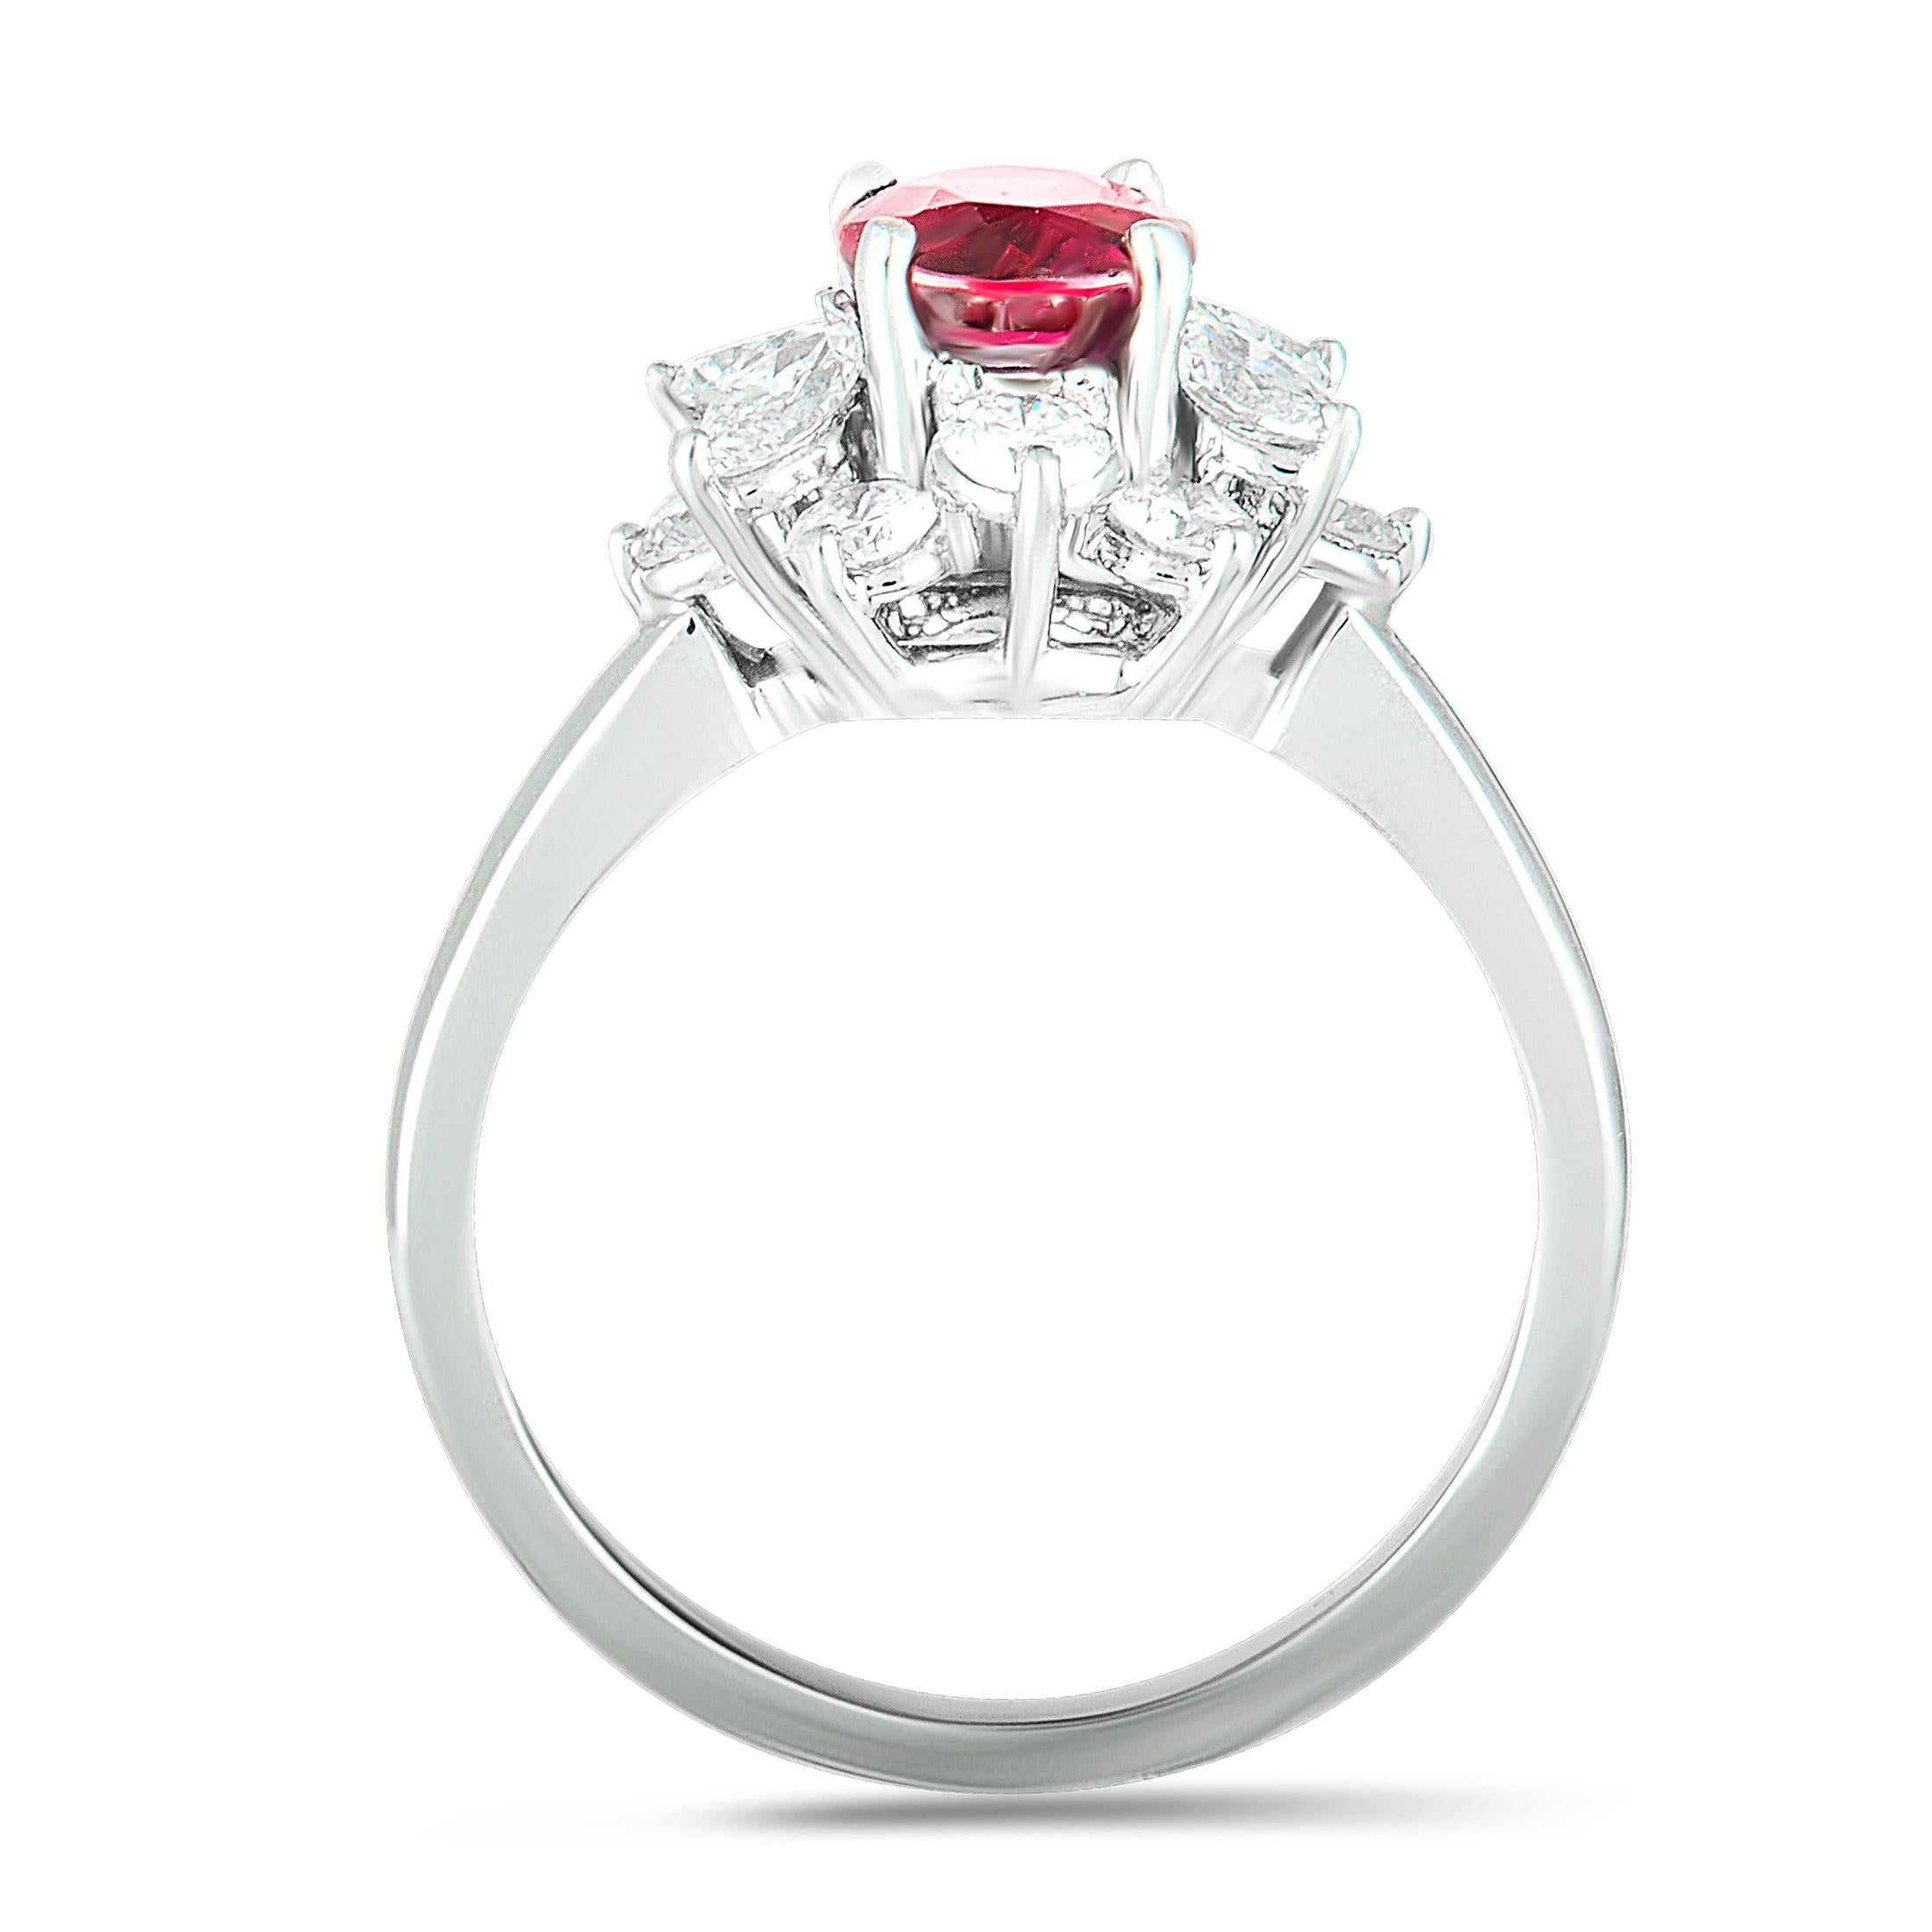 If you are looking for a piece that combines classy design with lavish gemstone décor then this sublime ring is a fantastic choice. Beautifully made of elegant platinum, this Tiffany & Co. ring is embellished with an exceptional ruby that weighs